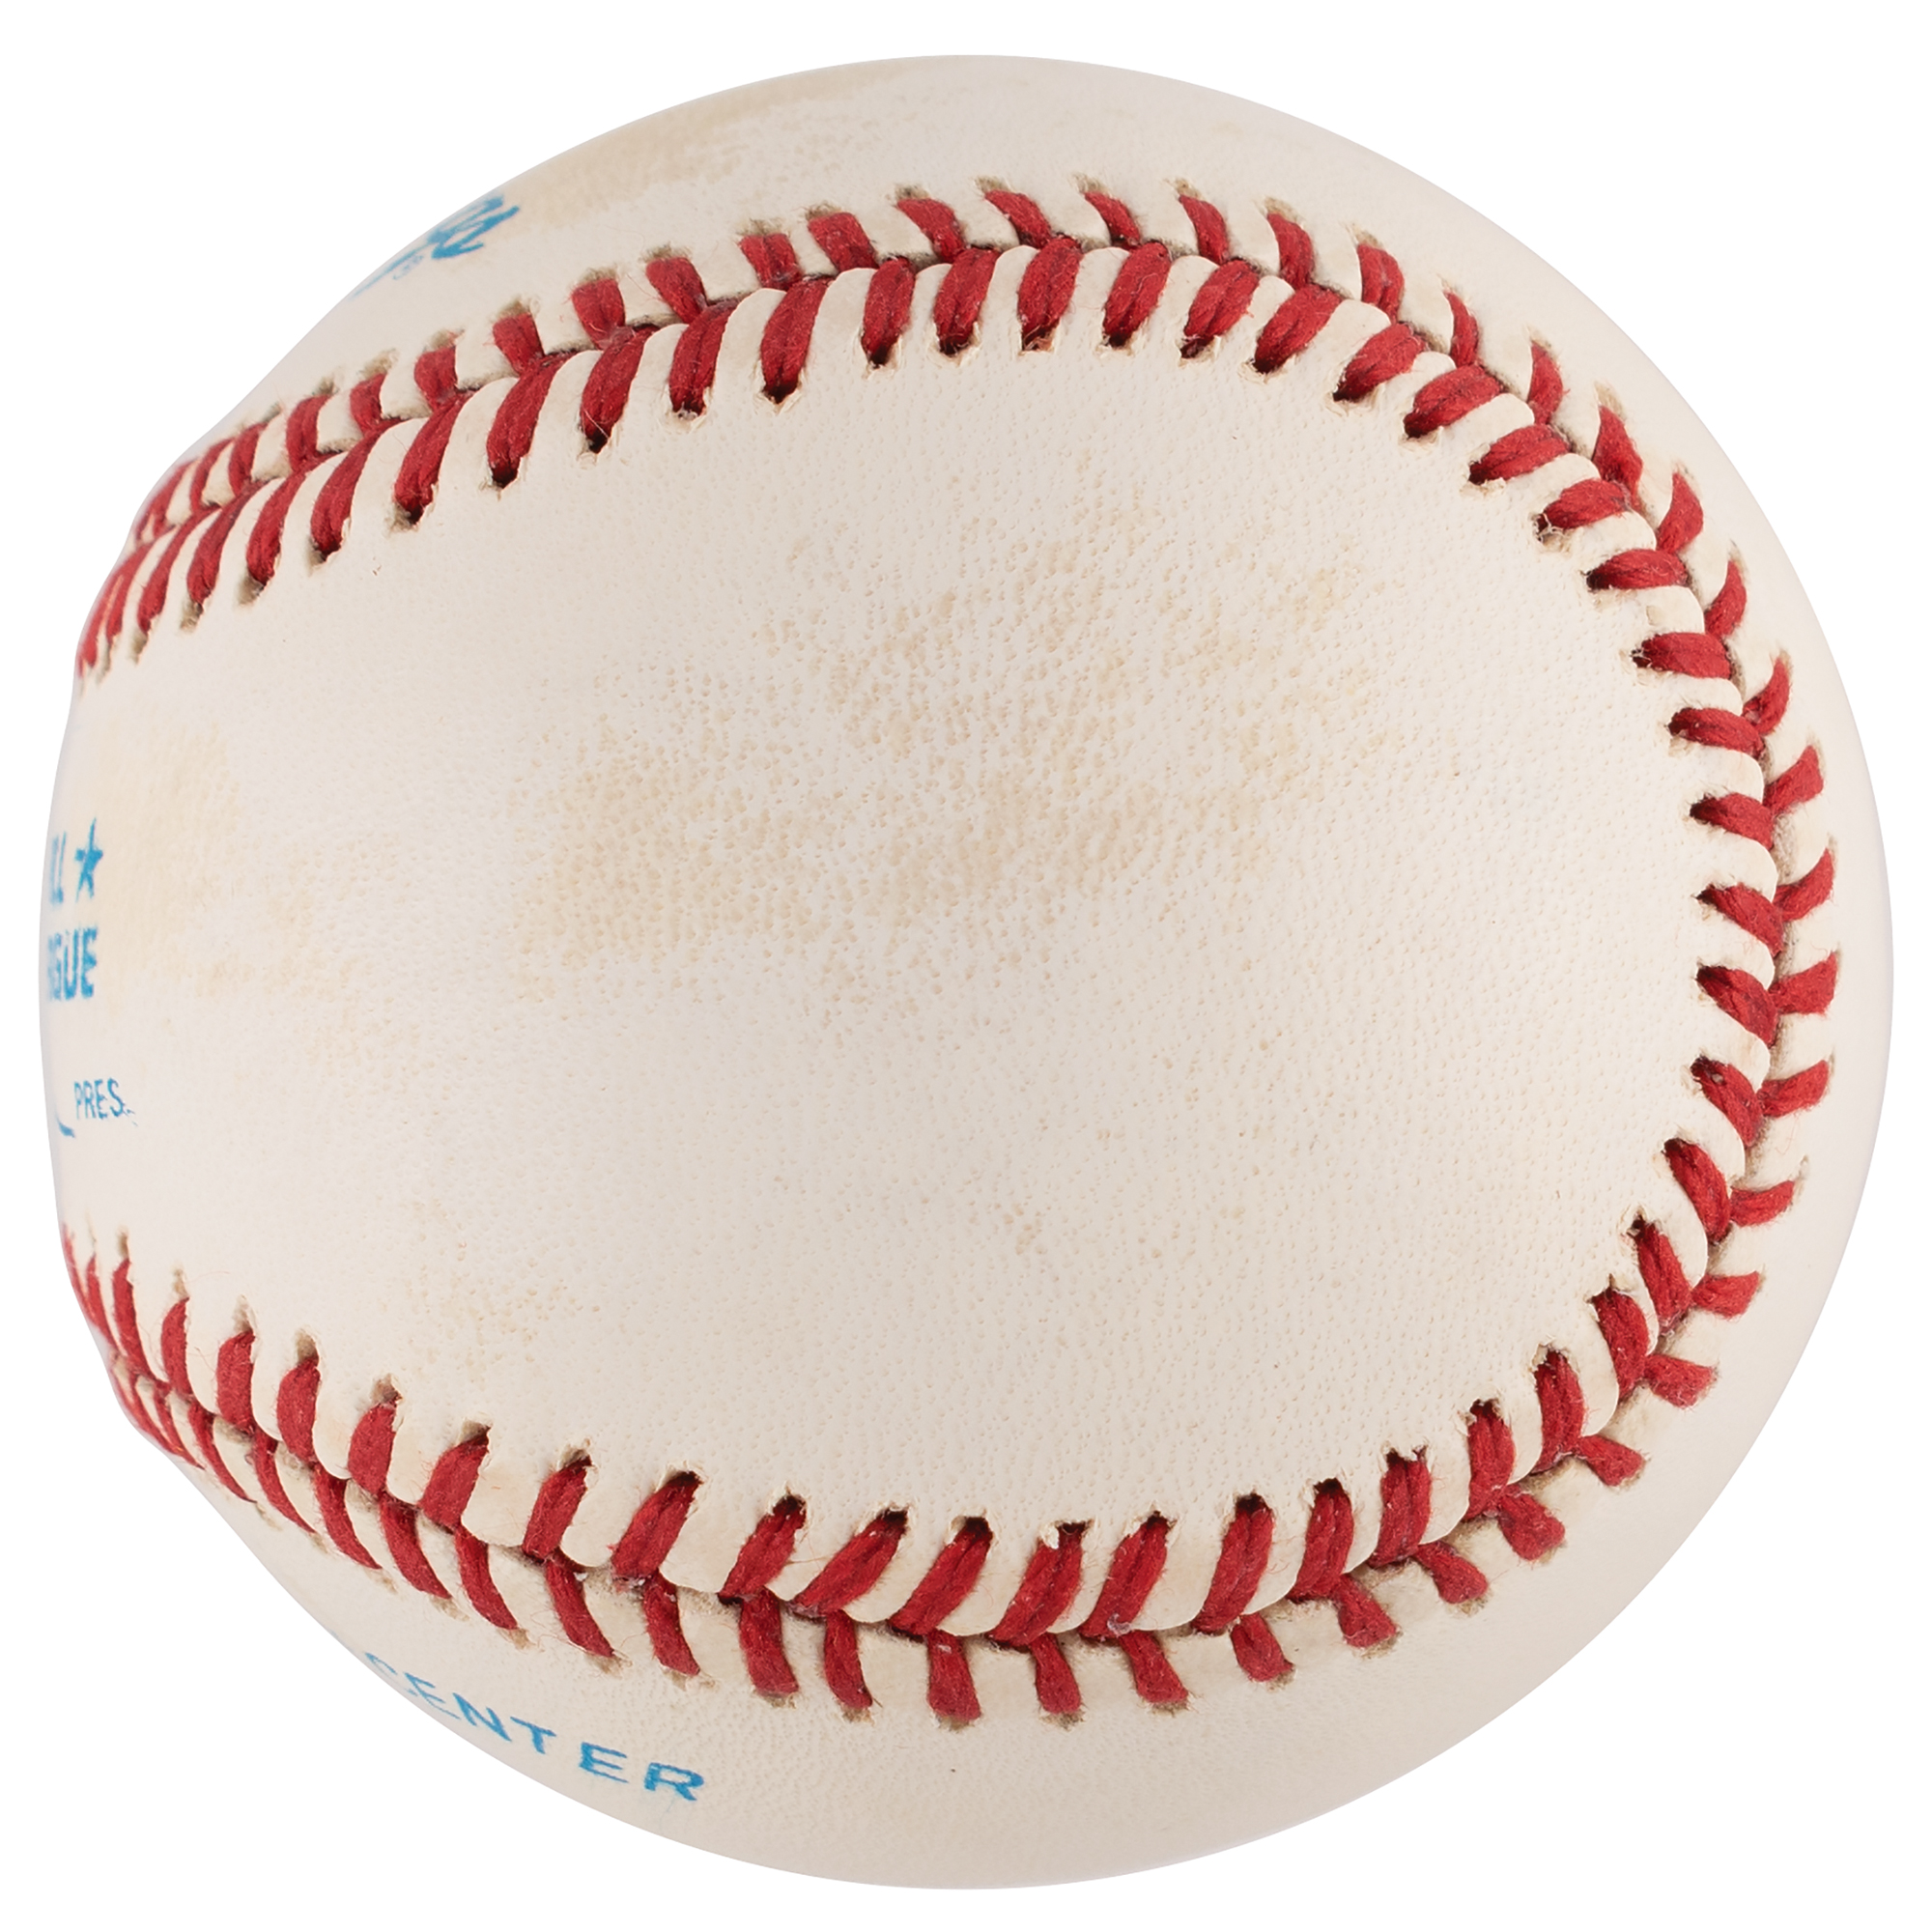 Neil Armstrong Signed Baseball | RR Auction